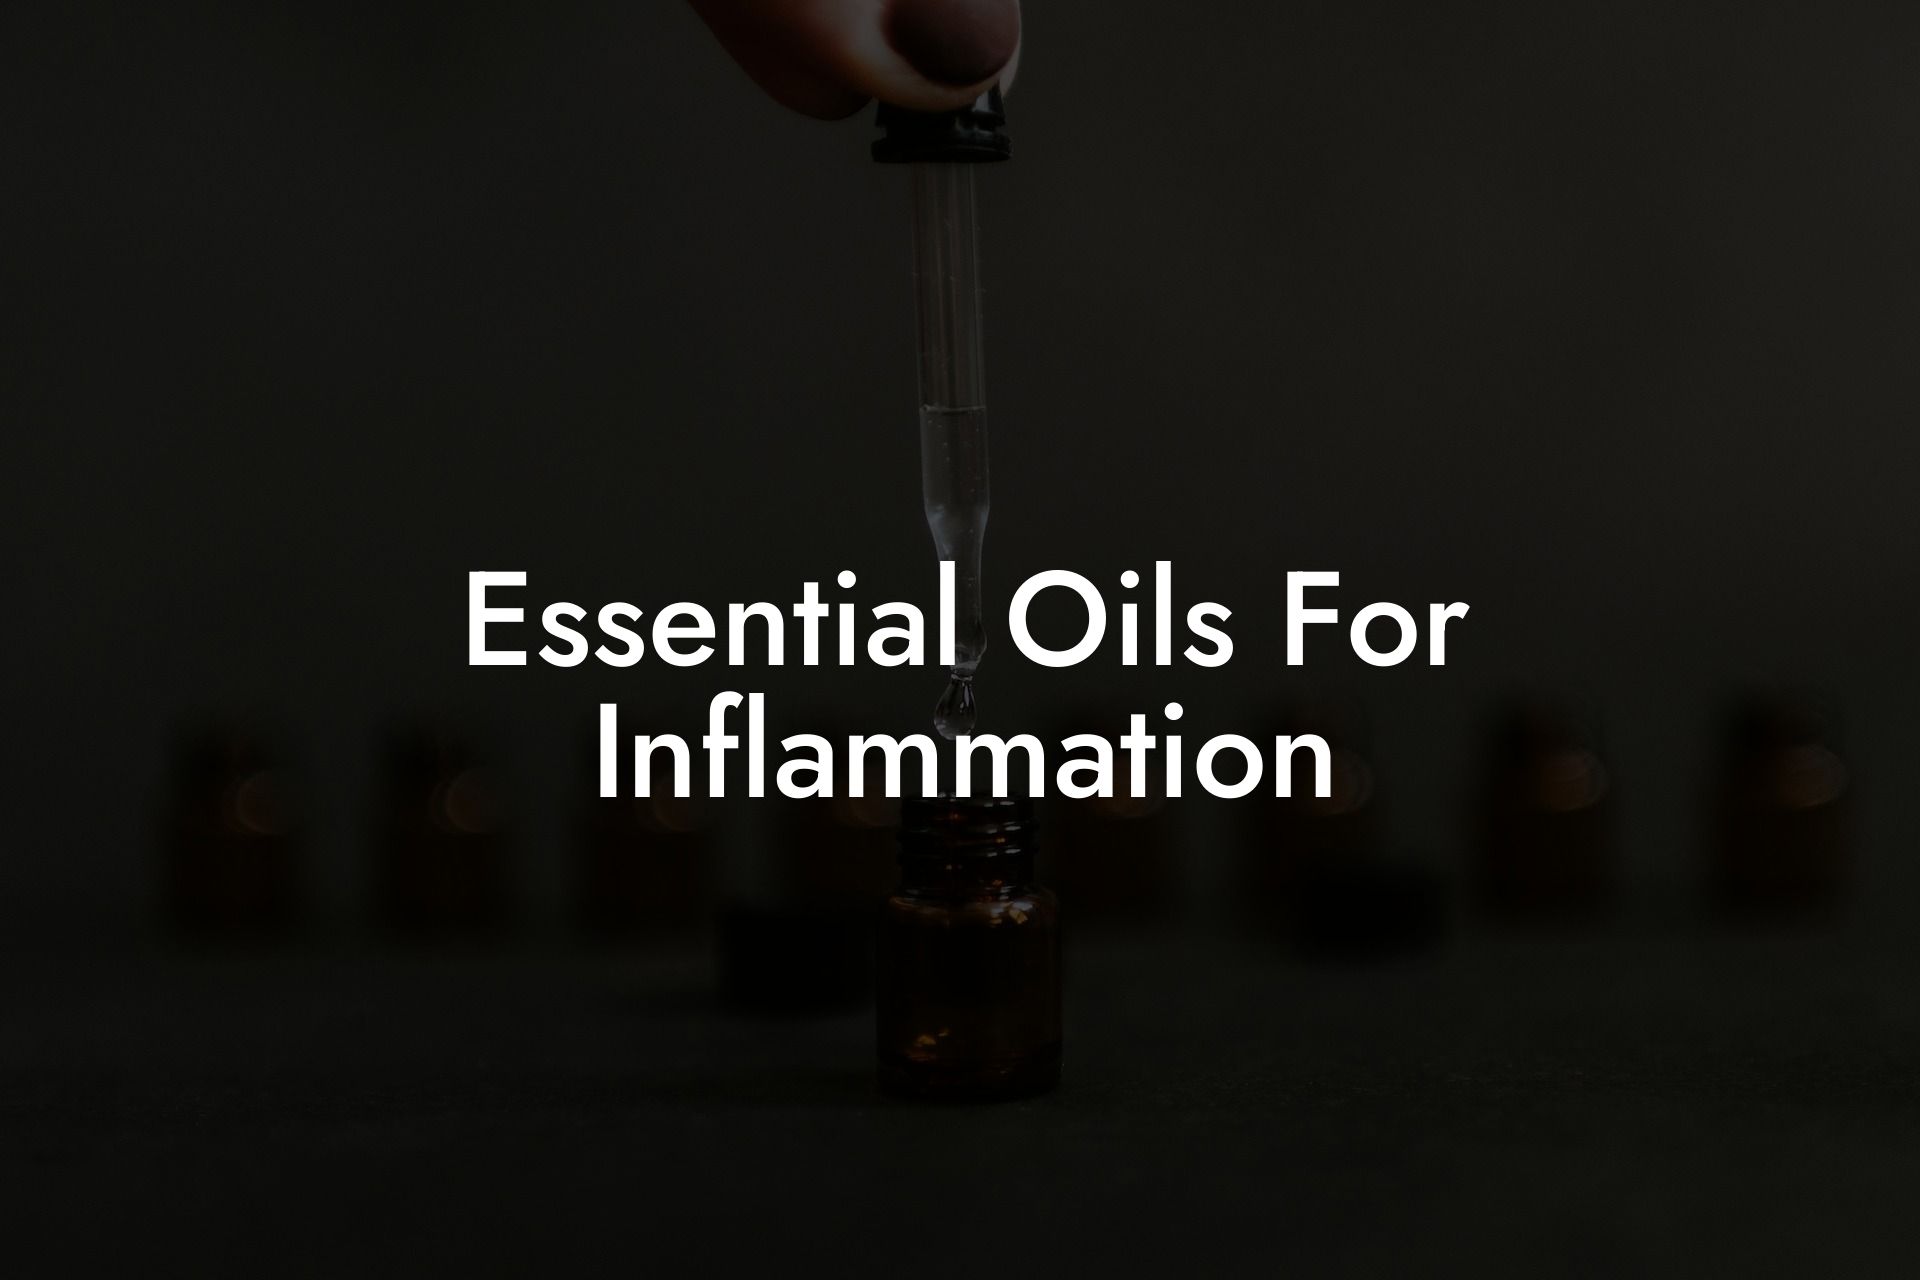 Essential Oils For Inflammation